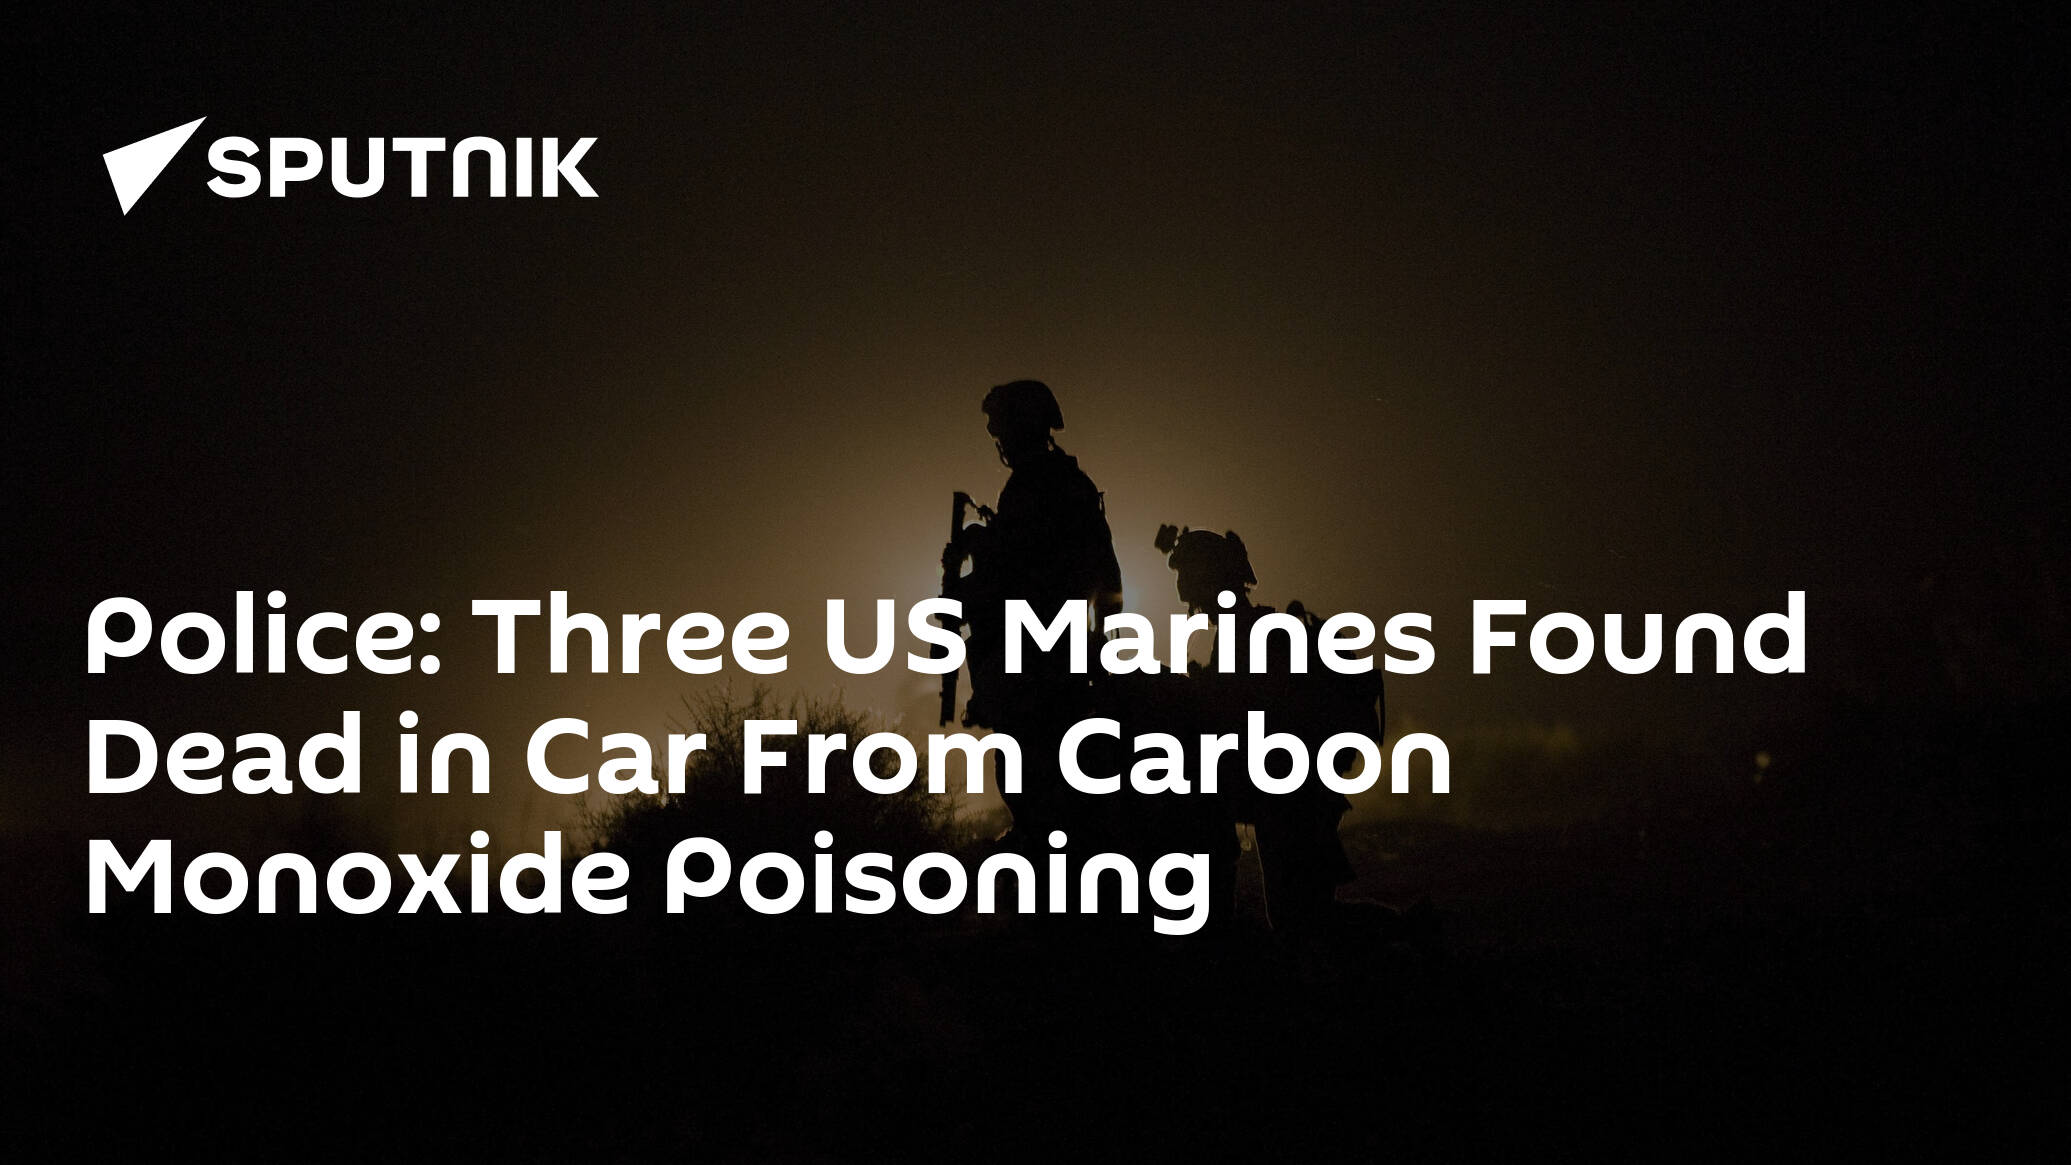 Police: Three US Marines Found Dead in Car From Carbon Monoxide Poisoning